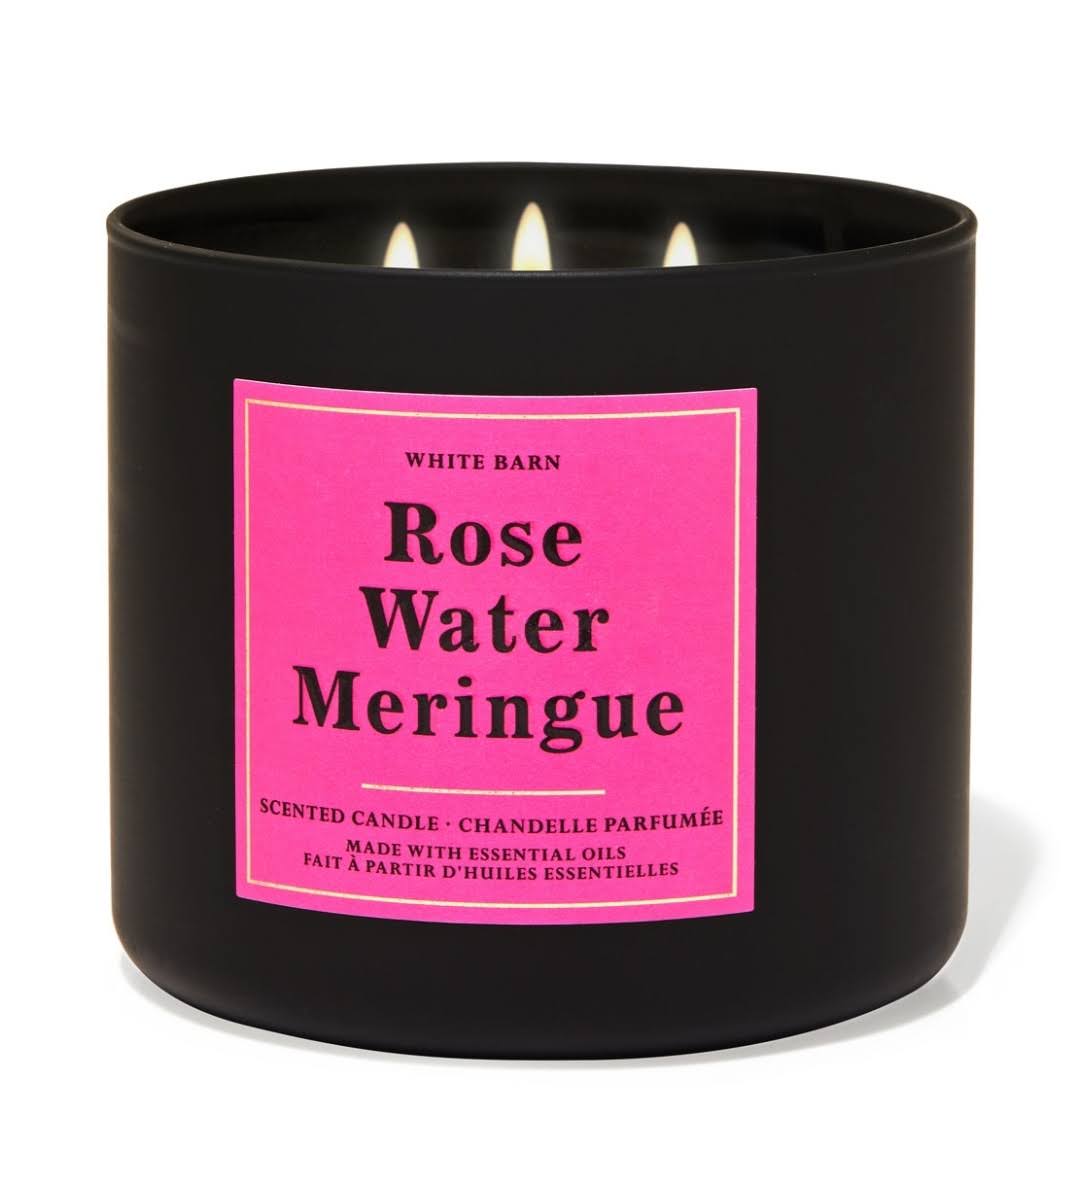 ROSE WATER MERINGUE 3-wick scented candle